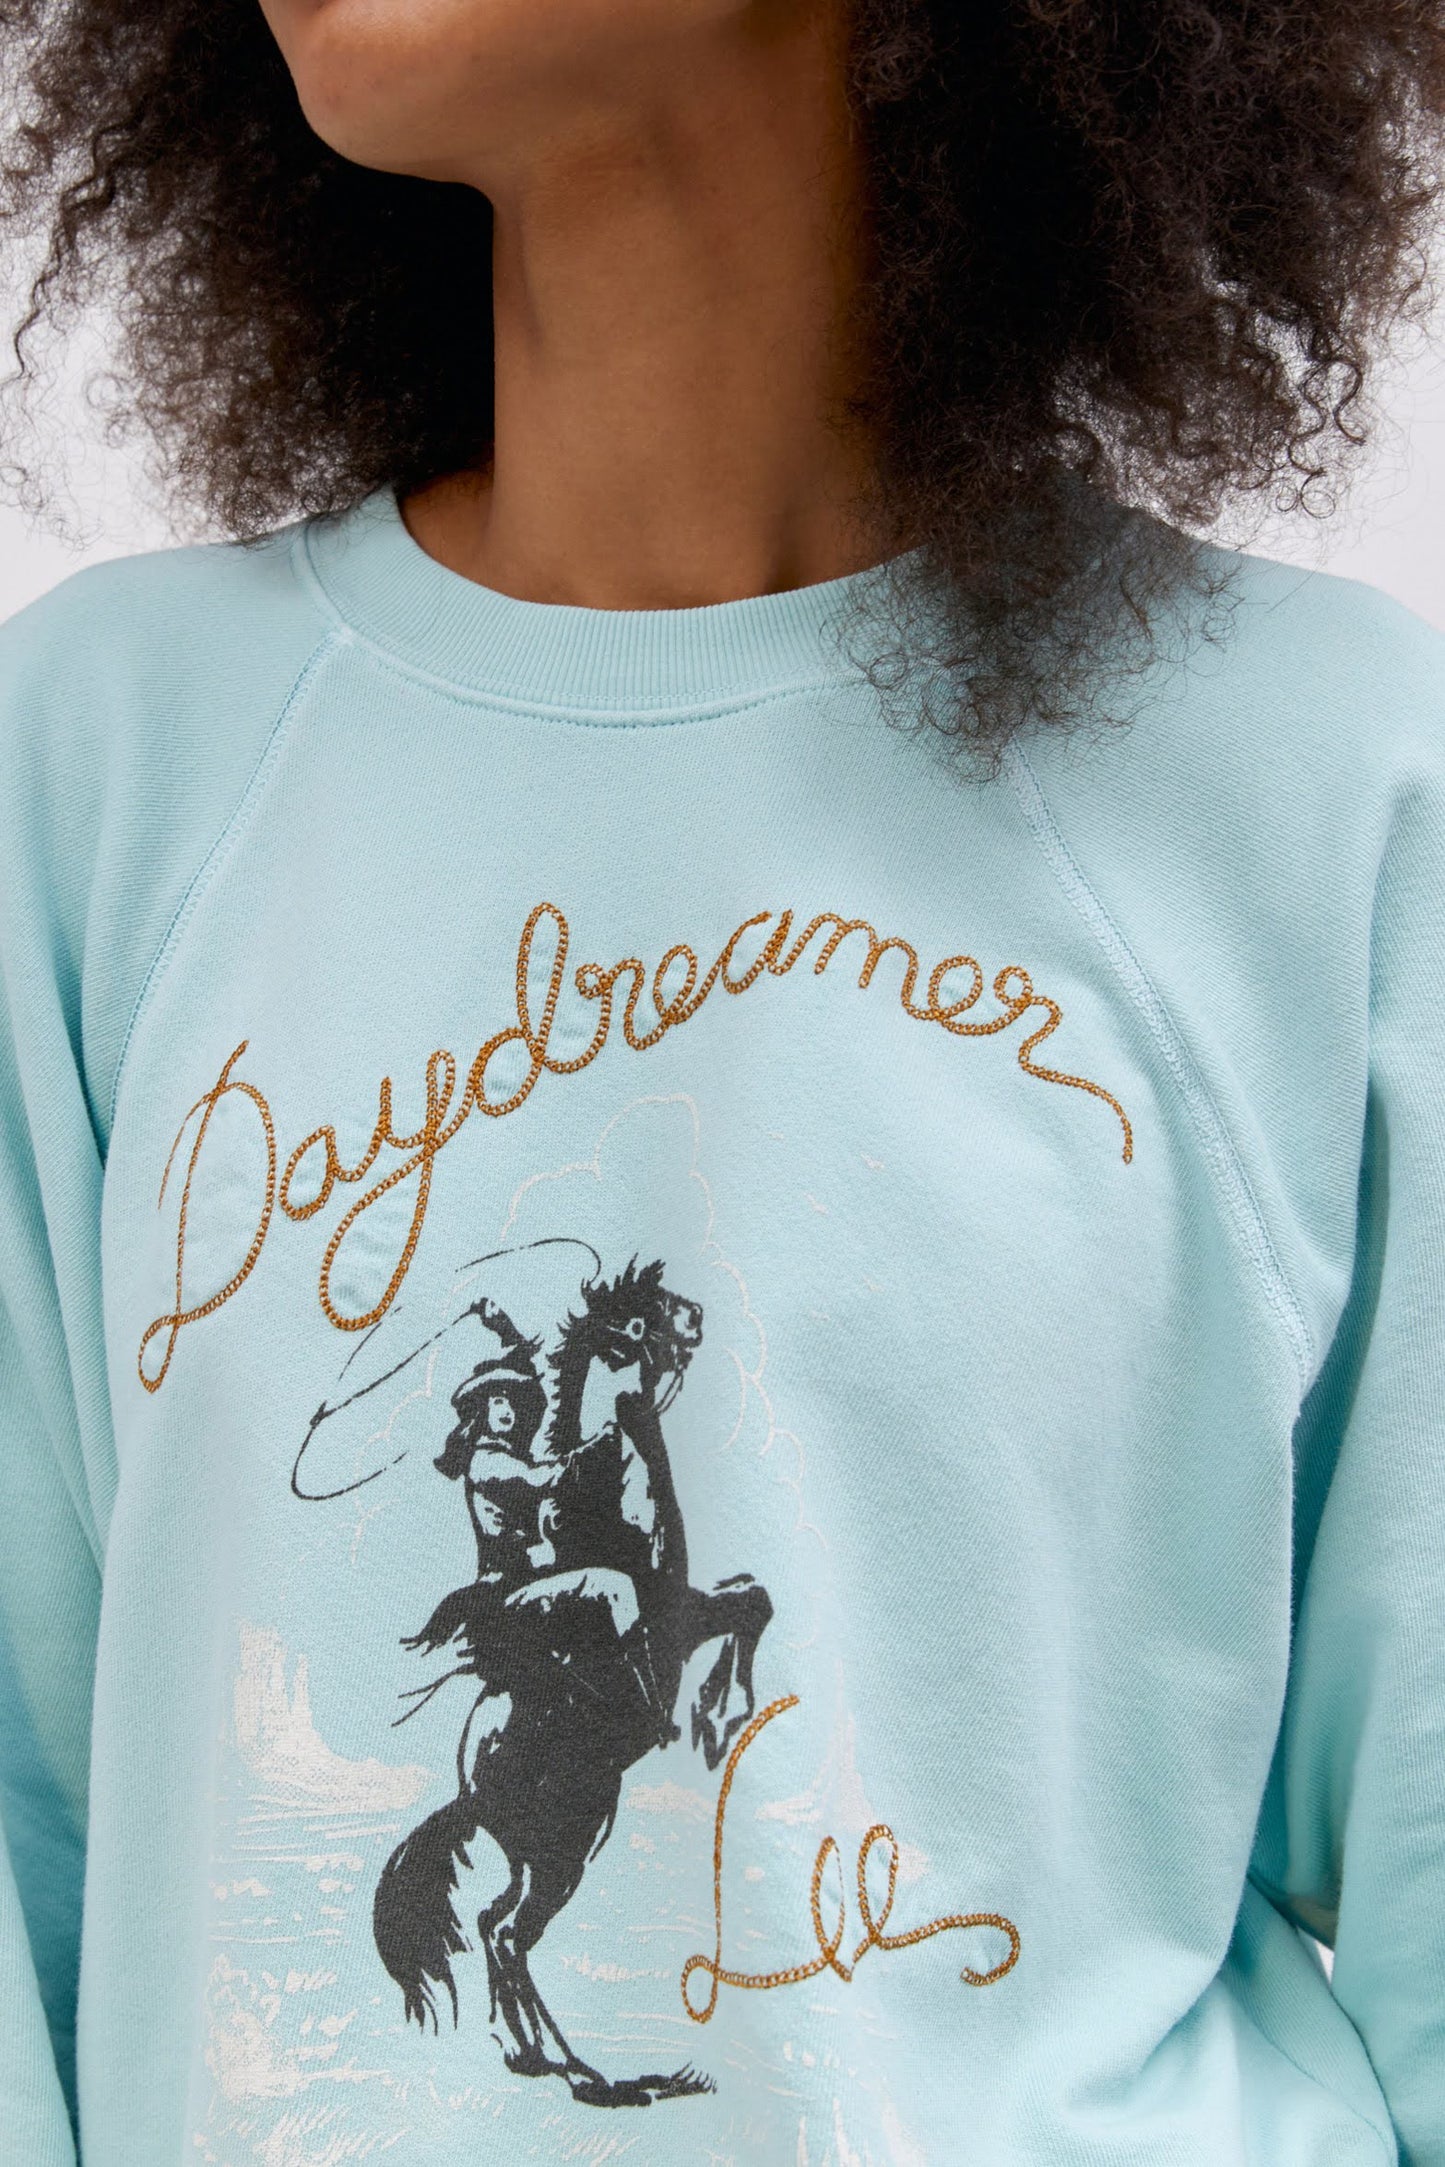 A curly-haired model featuring a raglan crew in icy moon with a bucking cowgirl graphic inspired by the spirit of the West lands on a lightweight, french terry raglan crew embroidered with lasso lettering.